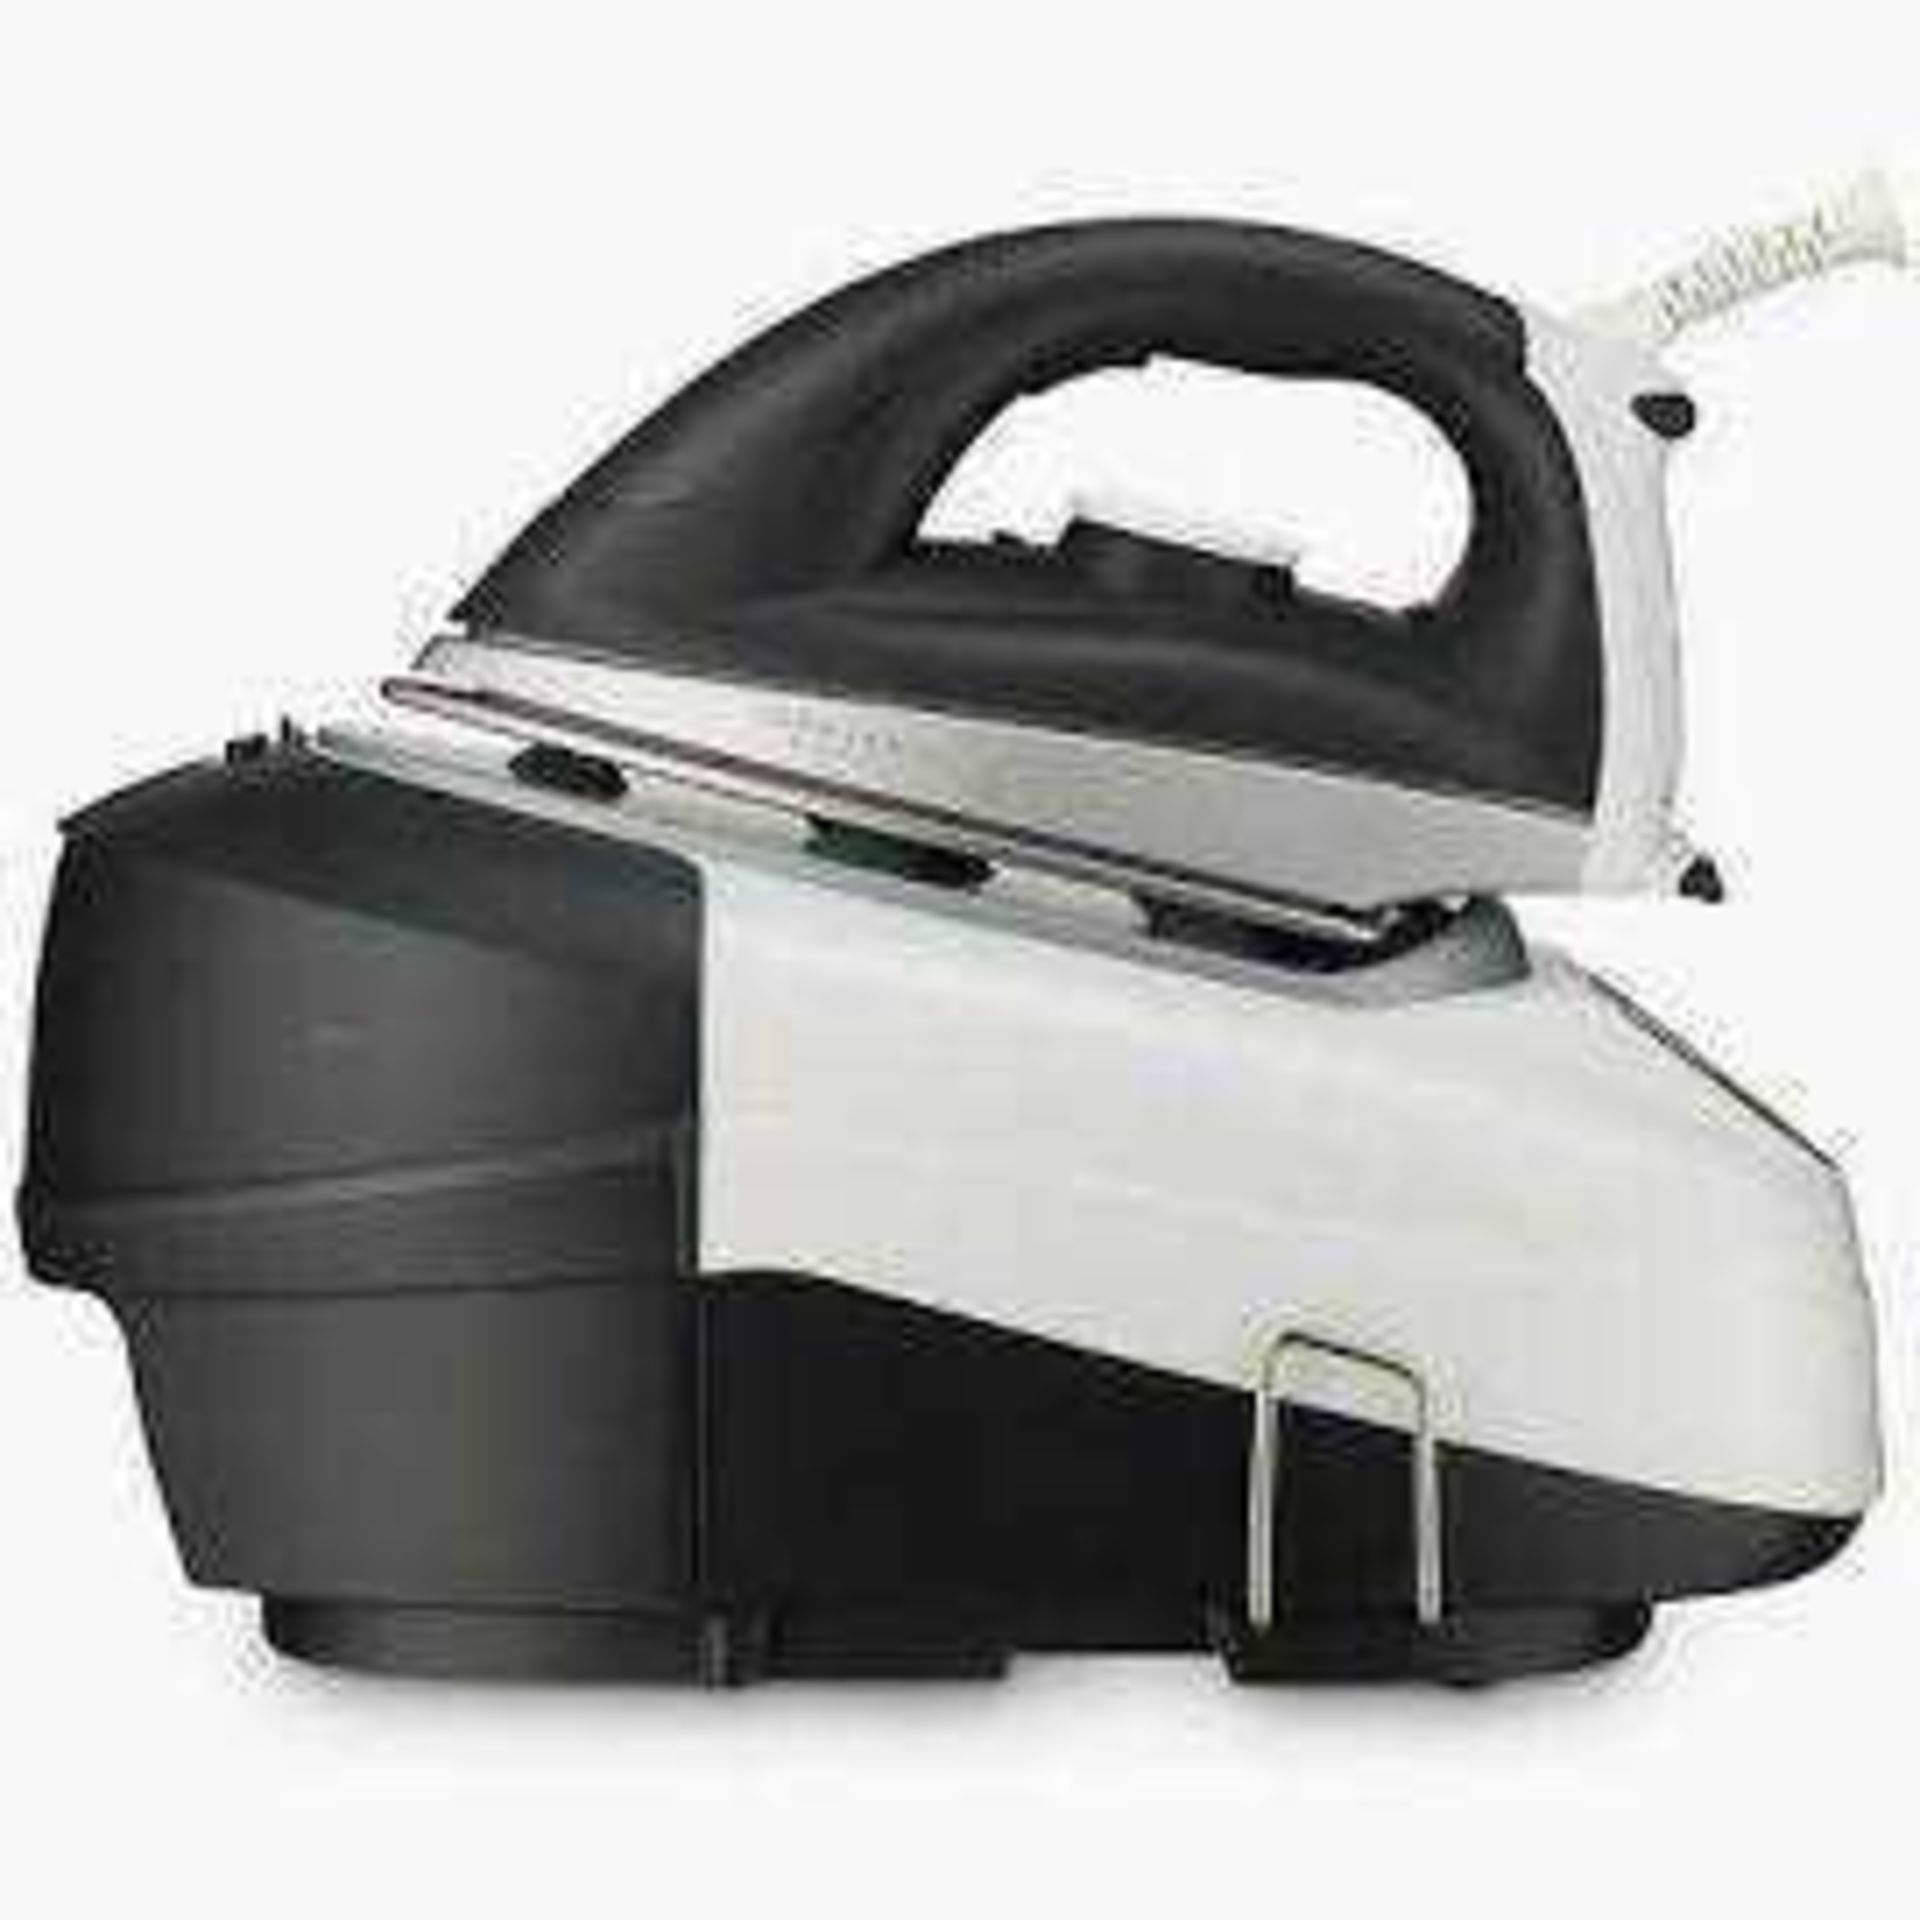 Rip £100 John Lewis And Partners Power Steam Generating Iron With Ceramic Soleplate For Hi Performan